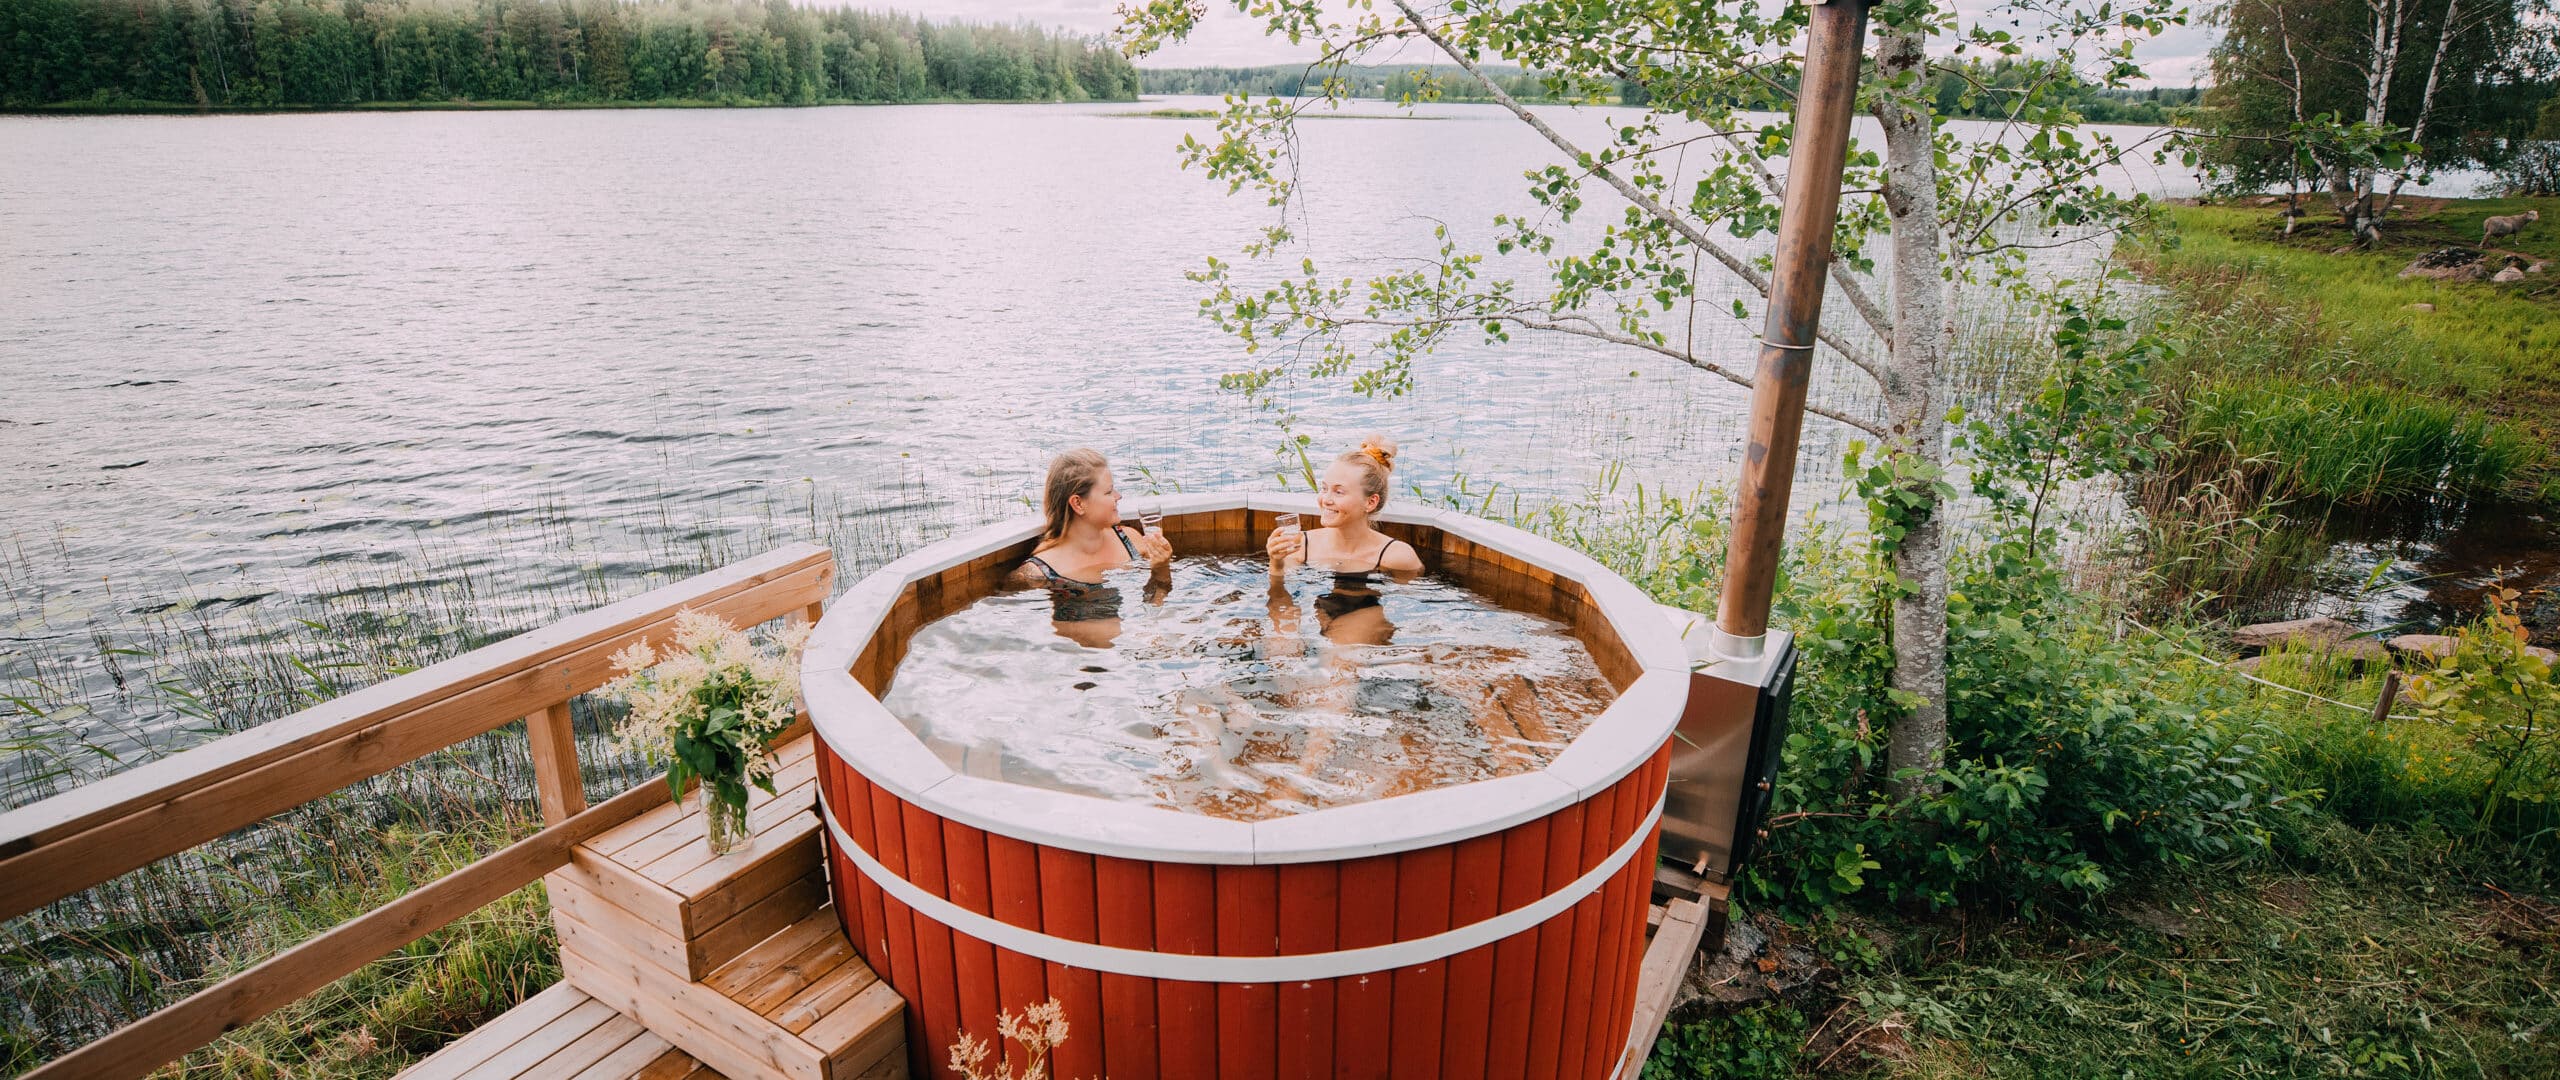 Two persons in an outdoor hot tub located next to a lake.